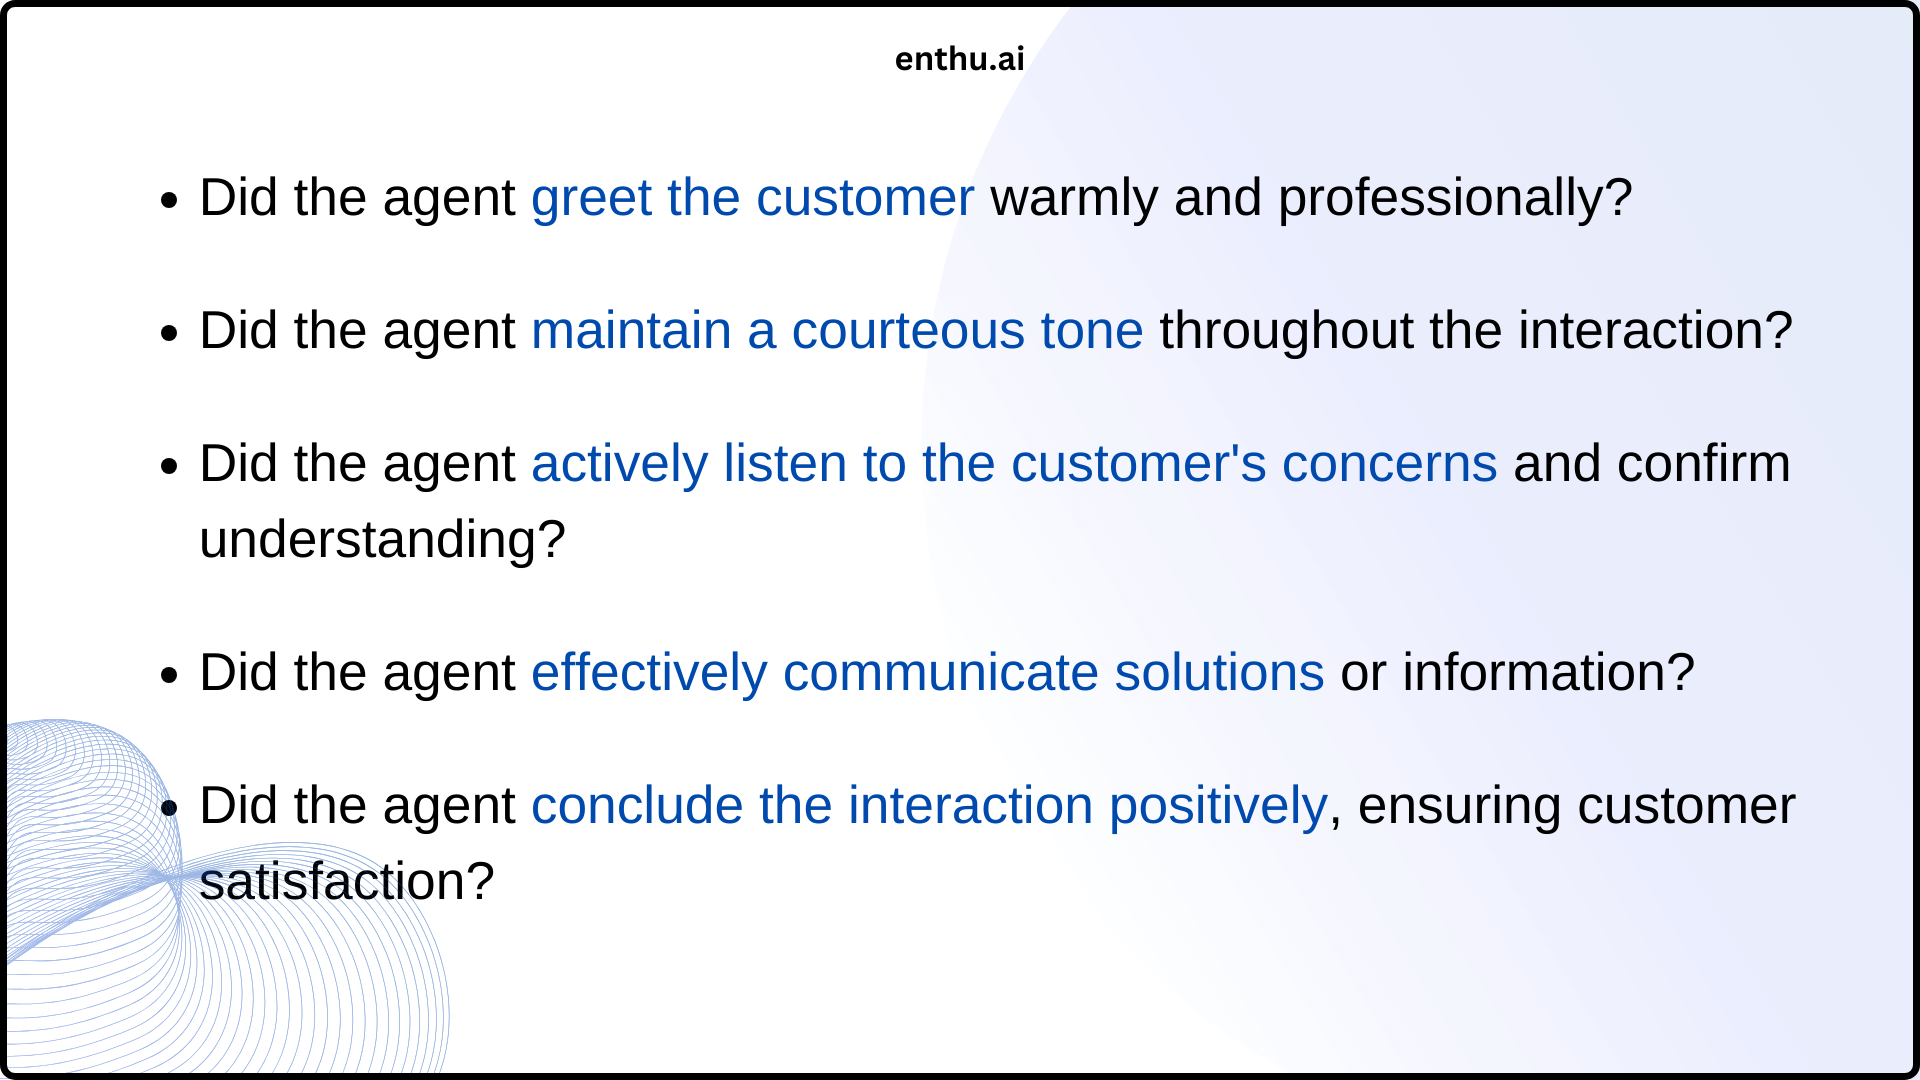 example for the communication skills section